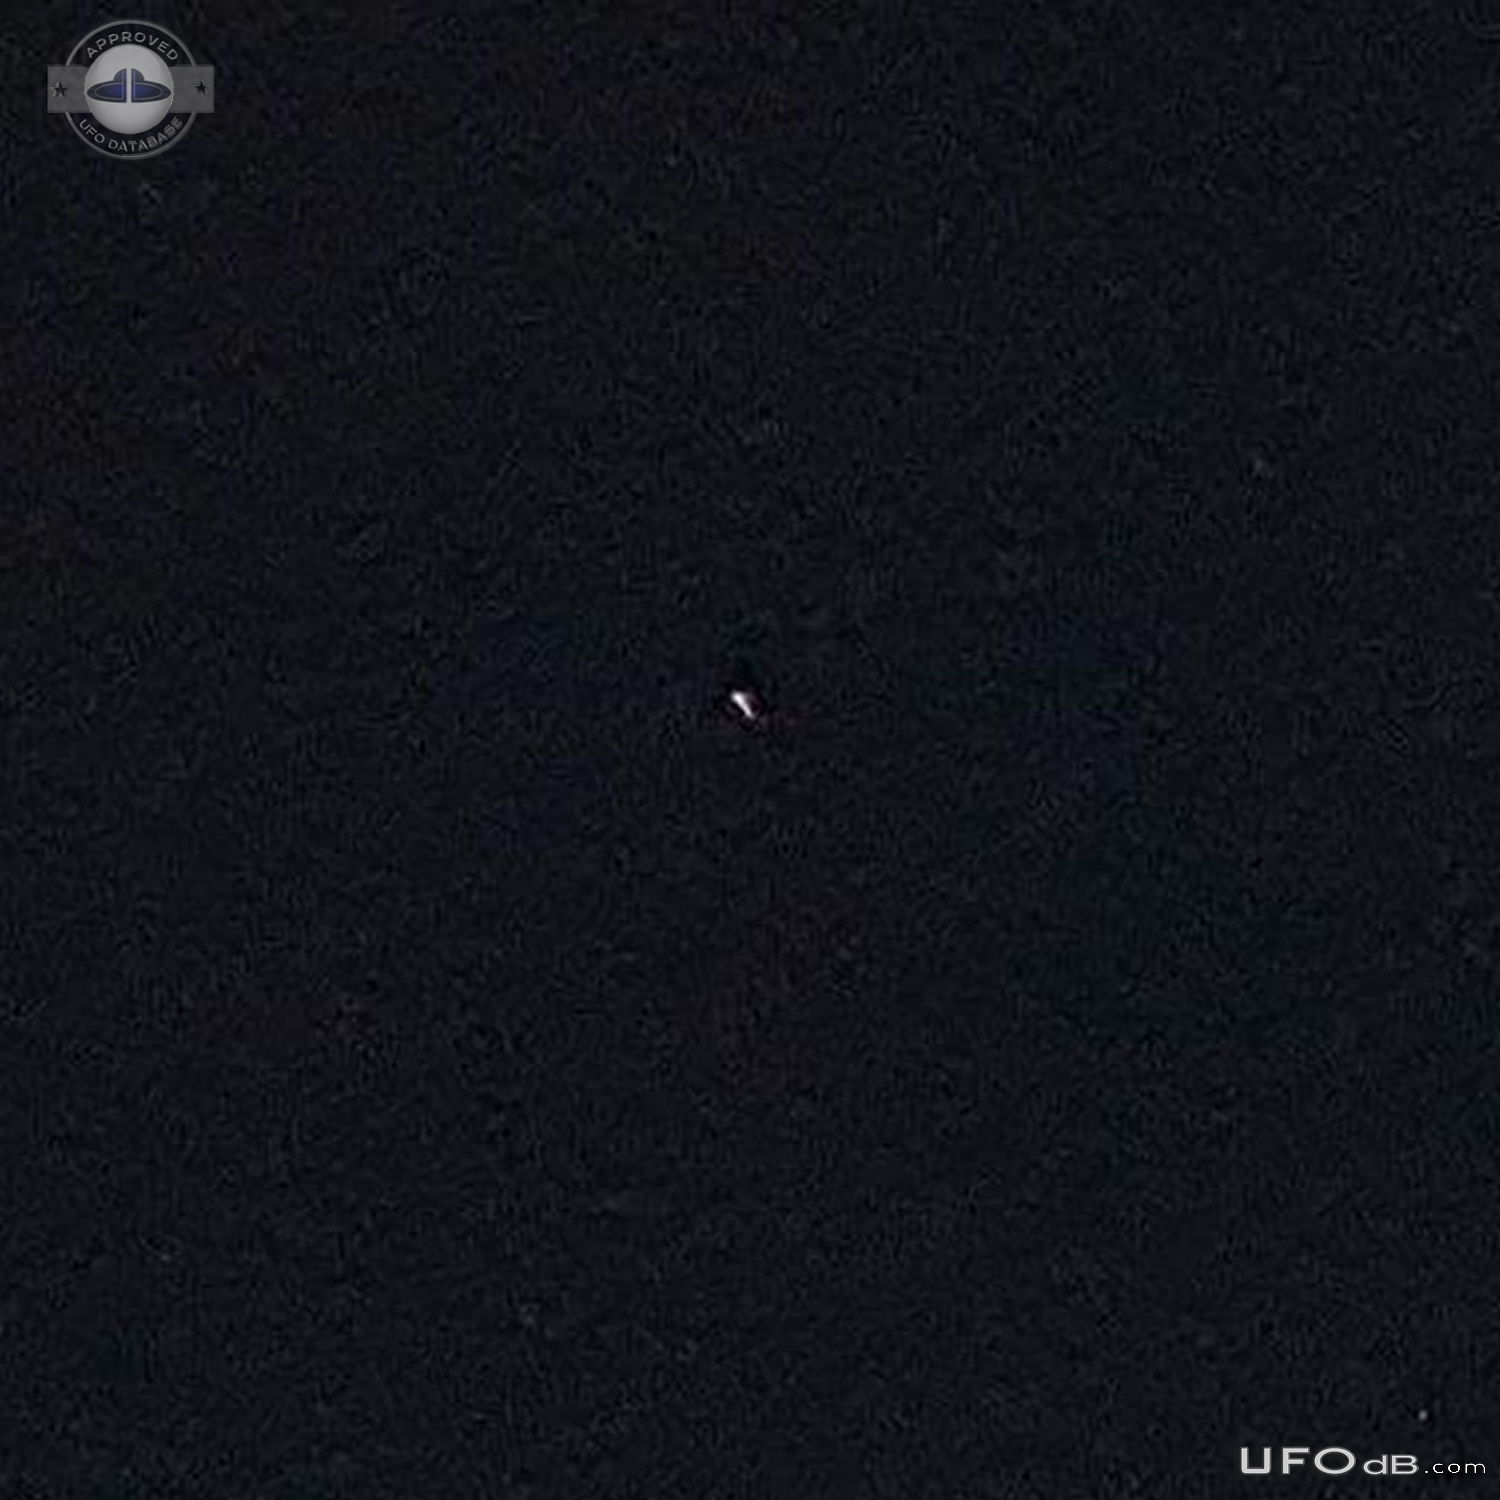 Bright UFO moved fast - like a star but moved - Tucson Arizona USA 201 UFO Picture #798-5